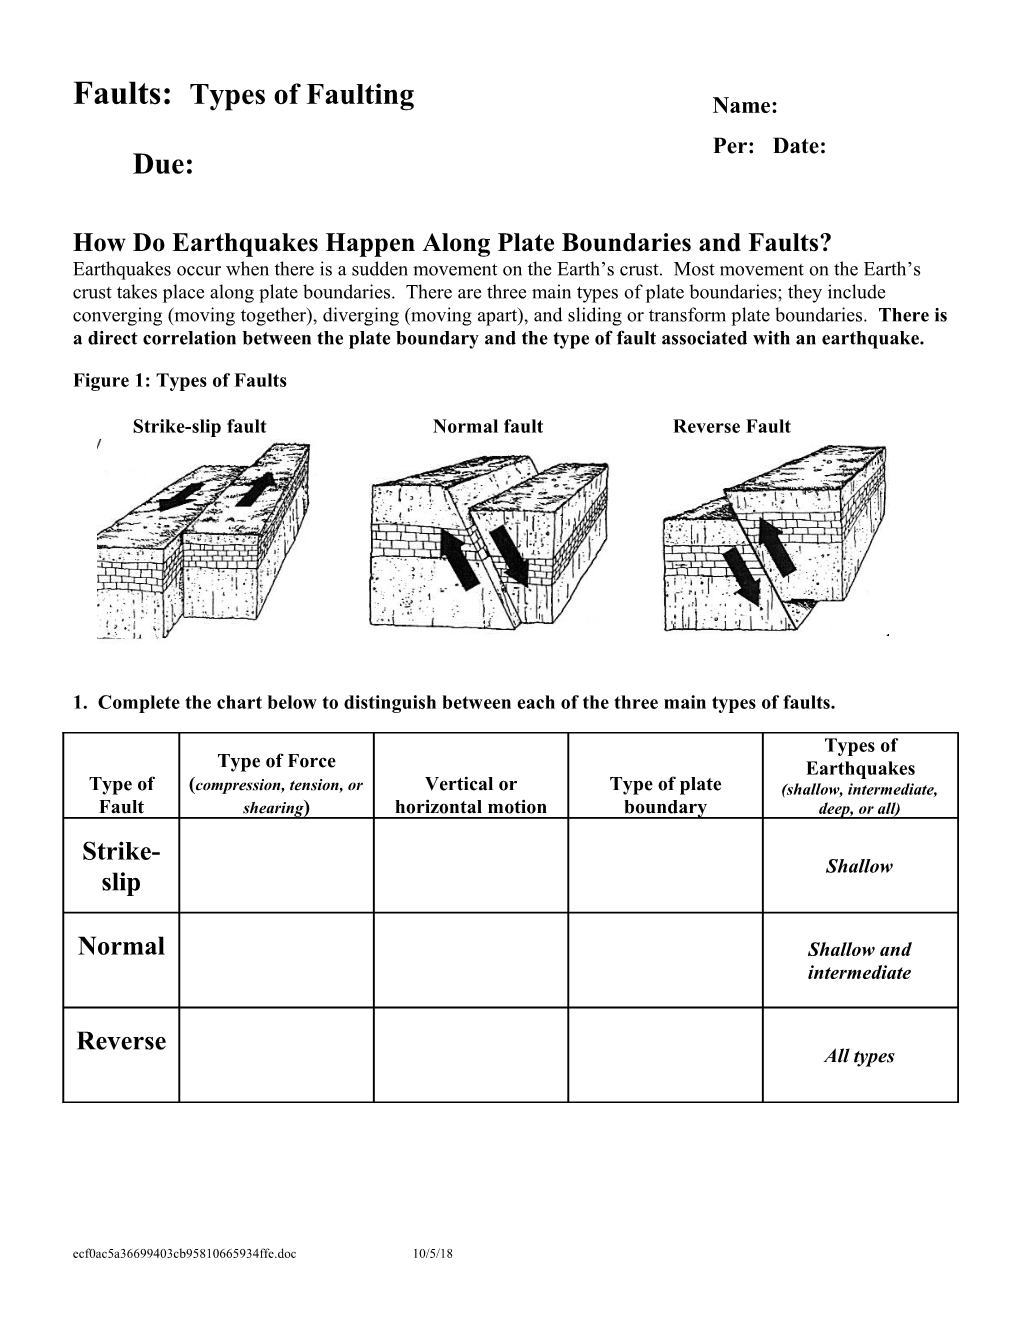 How Do Earthquakes Happen Along Plate Boundaries and Faults?